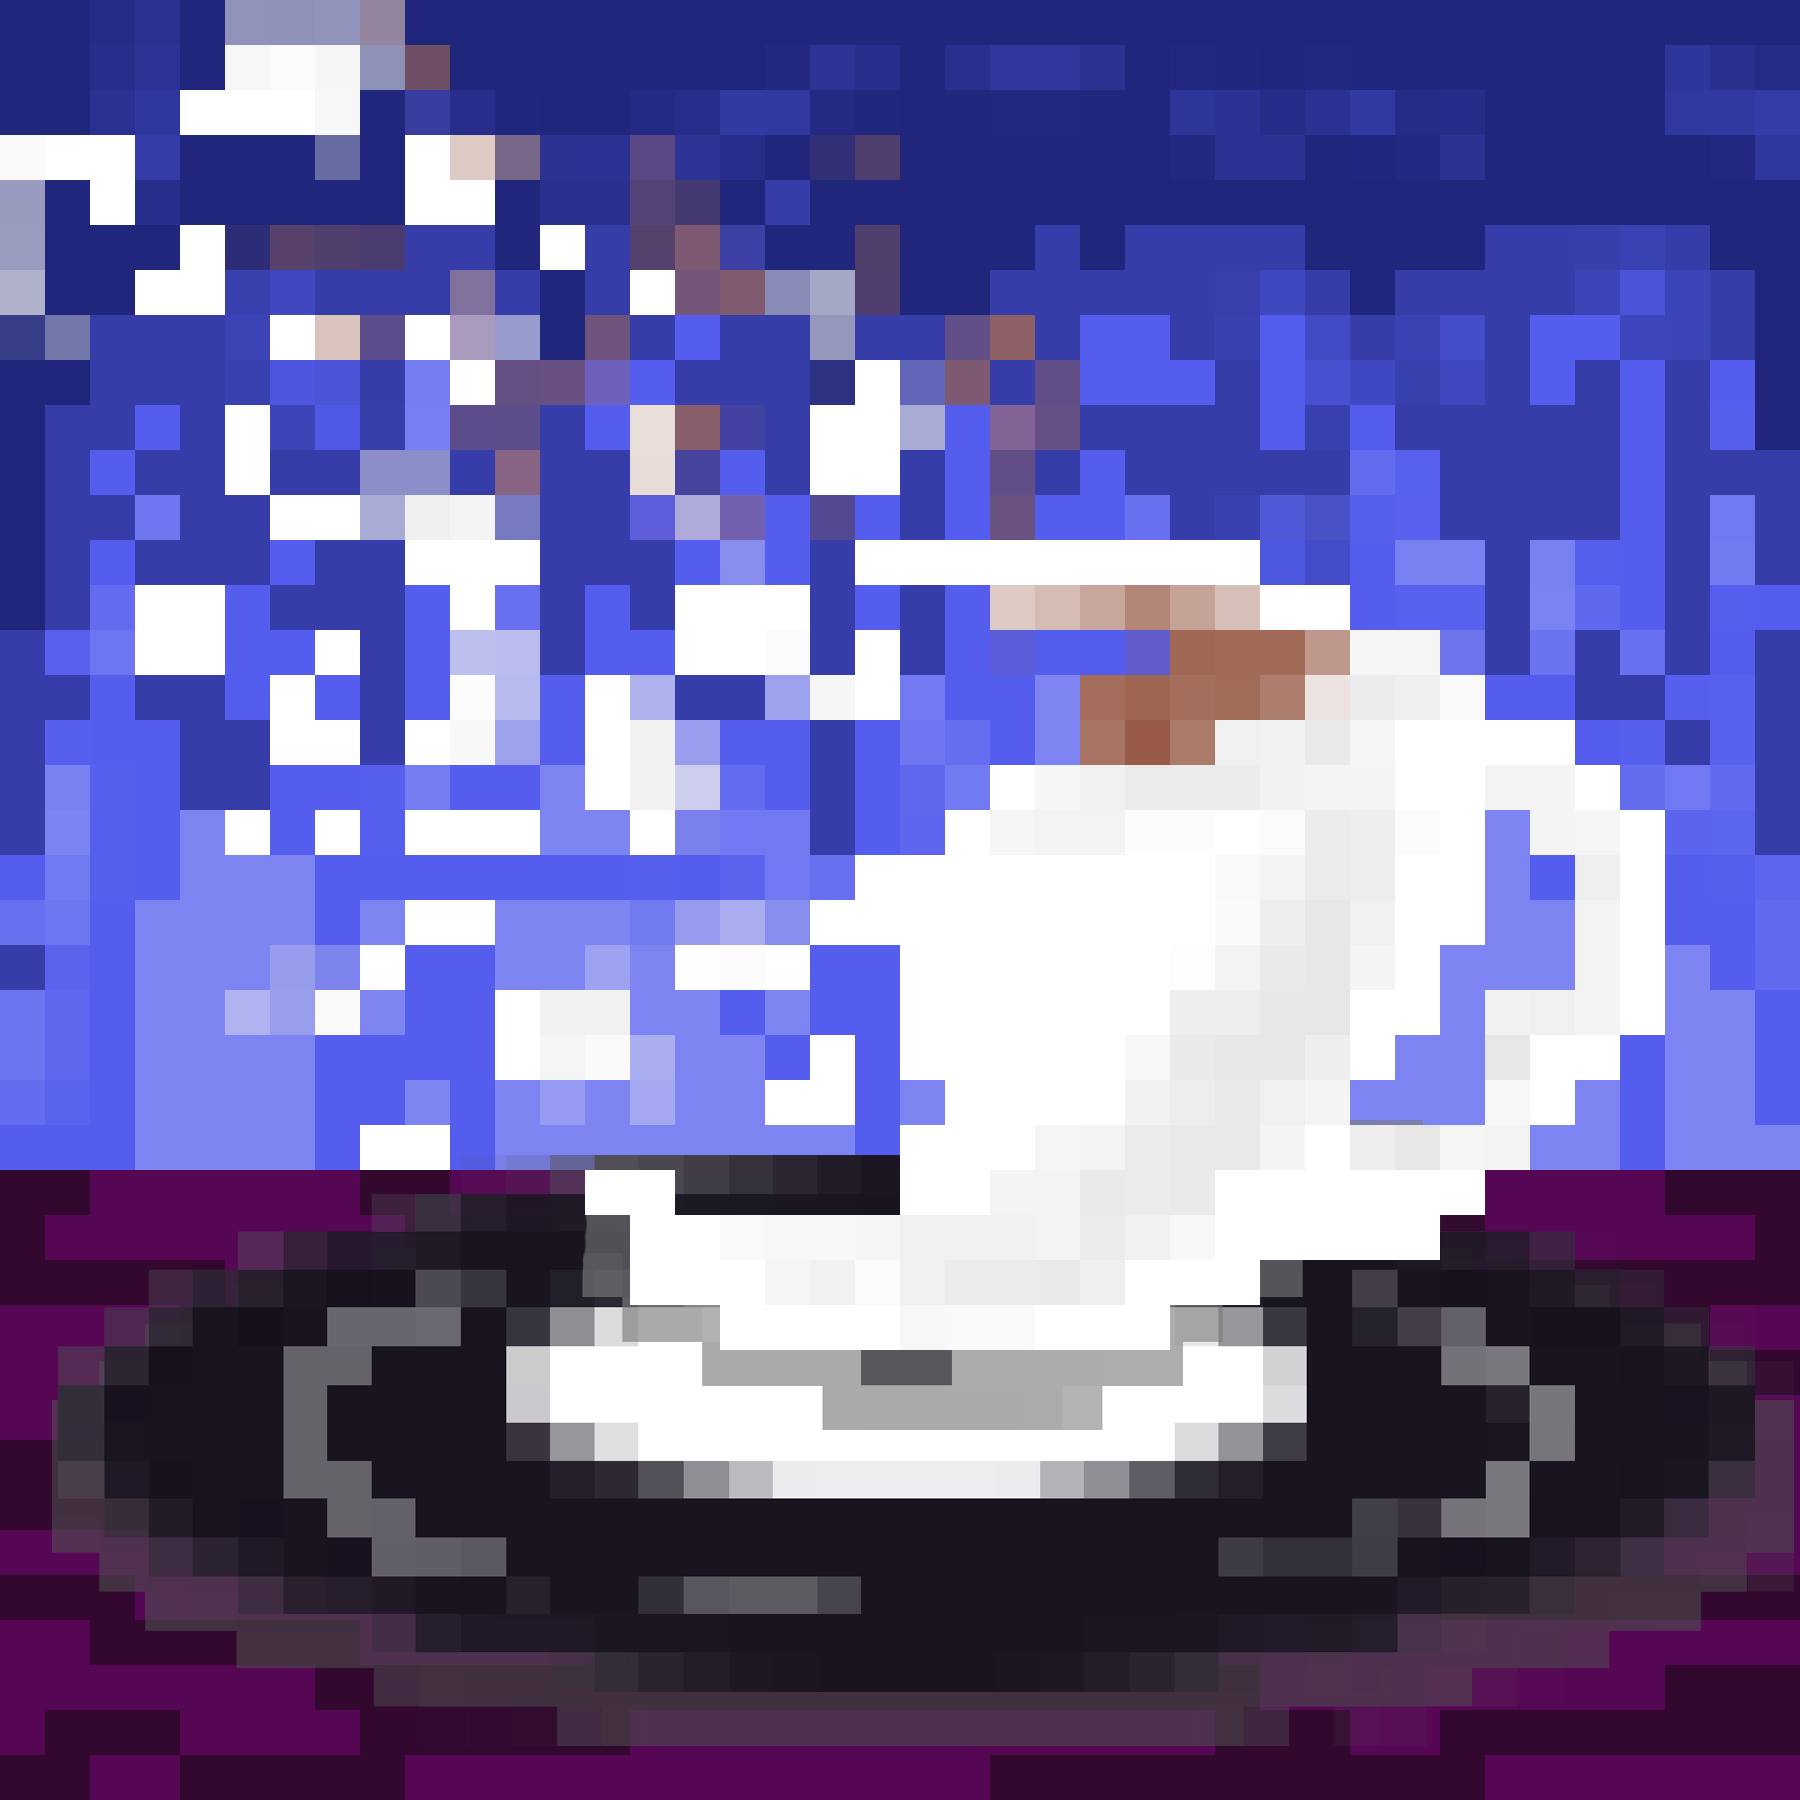 My avatar: a pixelated cup of tea, dissolving on a record player